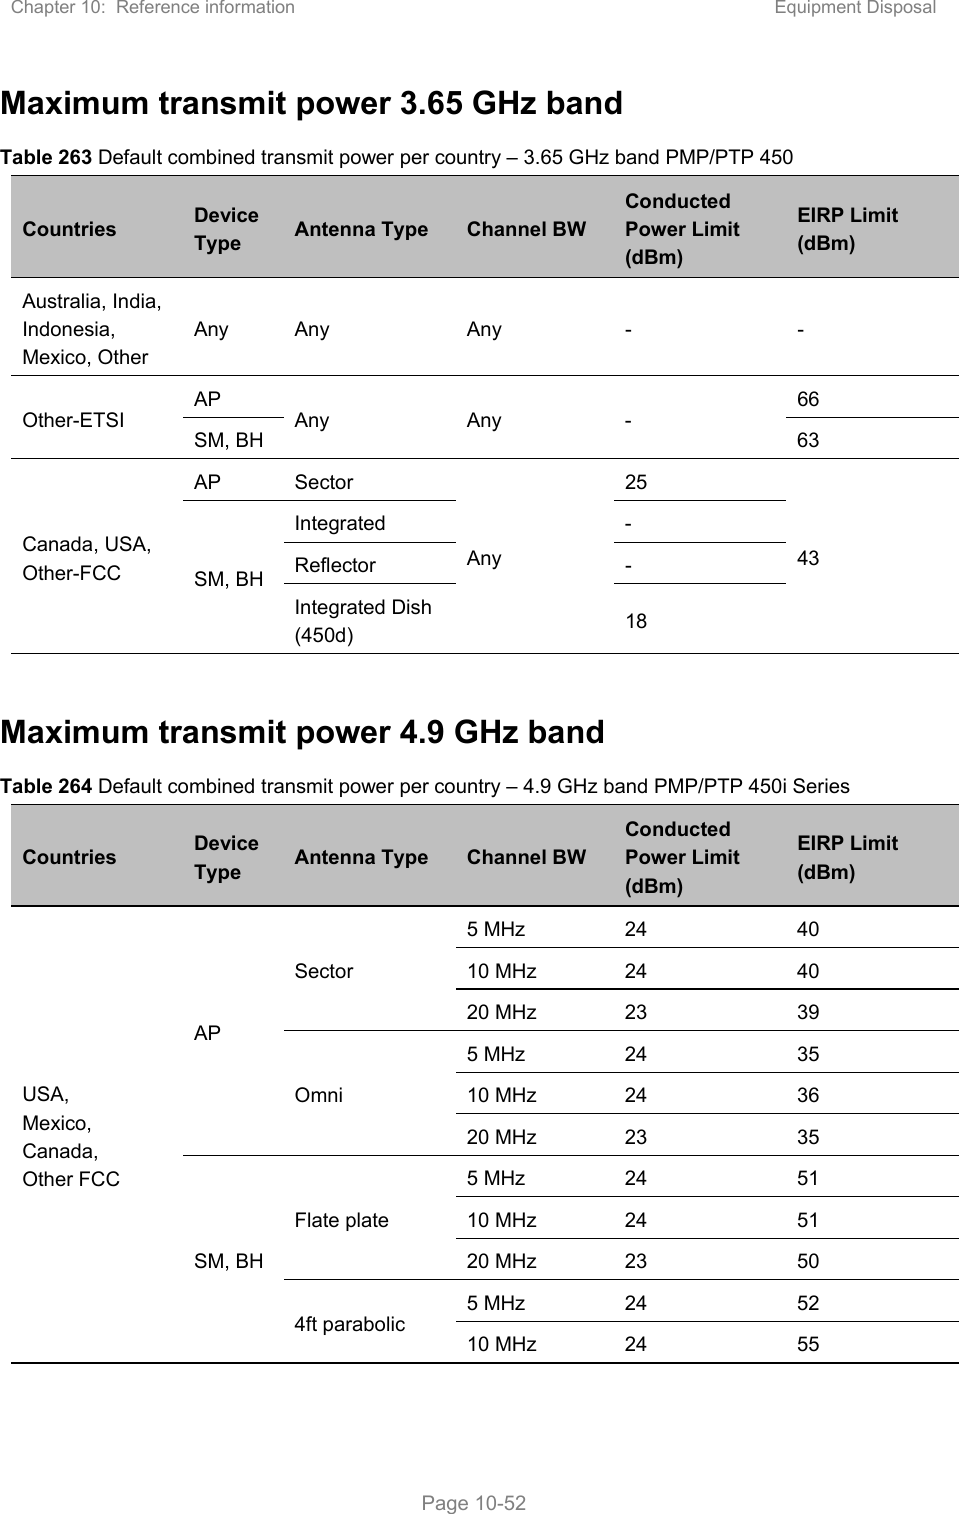 Chapter 10:  Reference information  Equipment Disposal   Page 10-52 Maximum transmit power 3.65 GHz band Table 263 Default combined transmit power per country – 3.65 GHz band PMP/PTP 450 Countries  Device Type  Antenna Type  Channel BW Conducted Power Limit (dBm) EIRP Limit (dBm) Australia, India, Indonesia, Mexico, Other Any  Any  Any  -  - Other-ETSI  AP  Any  Any  -  66 SM, BH  63 Canada, USA, Other-FCC AP  Sector Any 25 43 SM, BH Integrated  - Reflector  - Integrated Dish (450d)  18  Maximum transmit power 4.9 GHz band Table 264 Default combined transmit power per country – 4.9 GHz band PMP/PTP 450i Series Countries  Device Type  Antenna Type  Channel BW Conducted Power Limit (dBm) EIRP Limit (dBm) USA, Mexico, Canada, Other FCC AP Sector 5 MHz  24  40 10 MHz  24  40 20 MHz  23  39 Omni 5 MHz  24  35 10 MHz  24  36 20 MHz  23  35 SM, BH Flate plate 5 MHz  24  51 10 MHz  24  51 20 MHz  23  50 4ft parabolic  5 MHz  24  52 10 MHz  24  55 